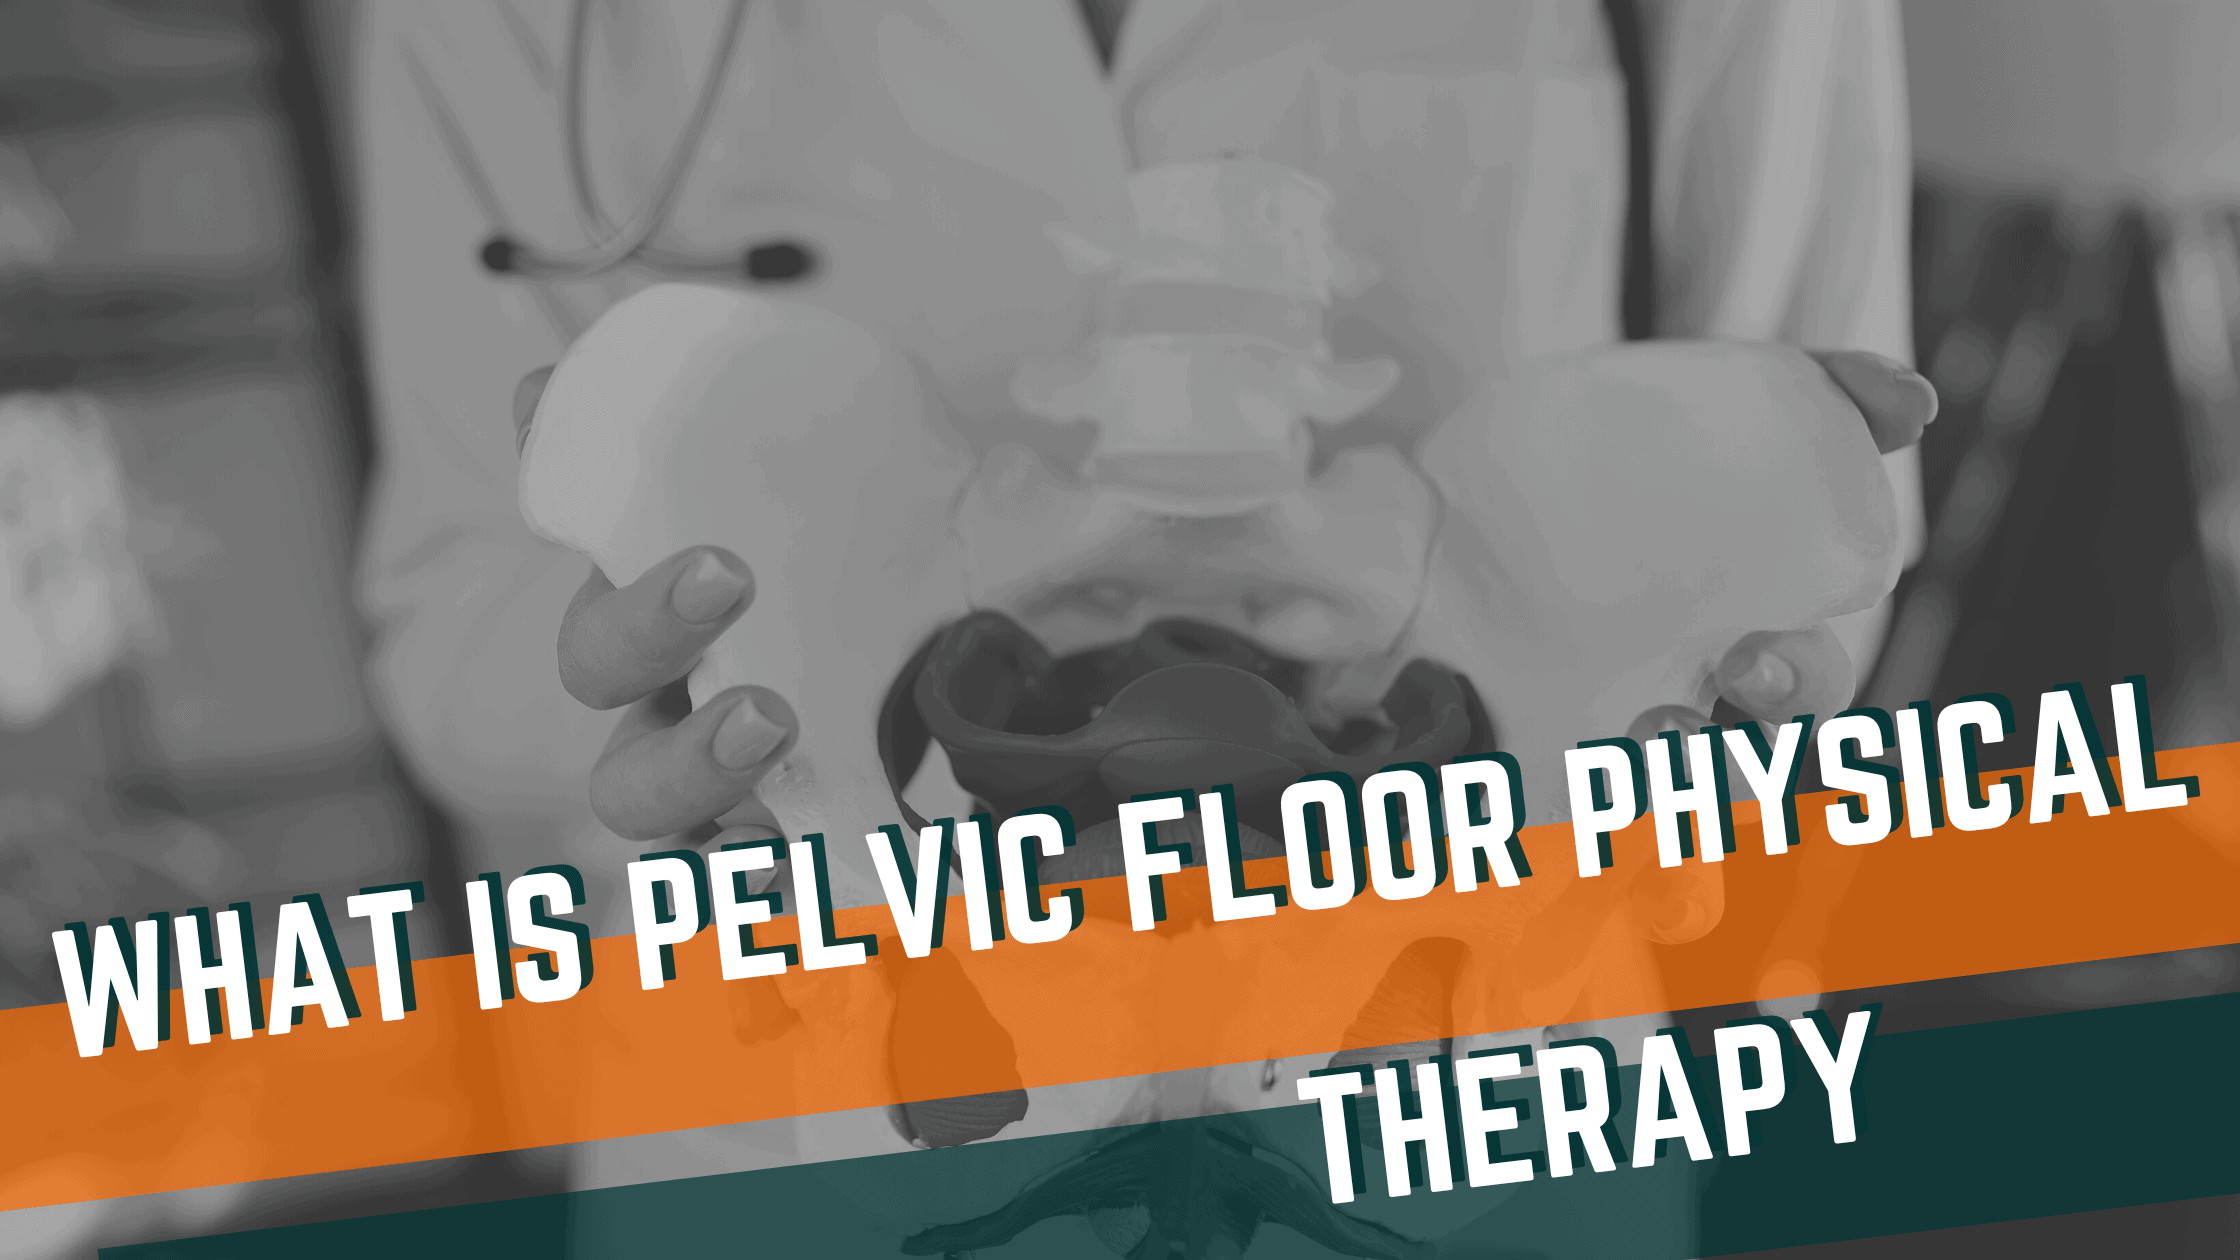 Featured image for “What is Pelvic Floor Physical Therapy?”